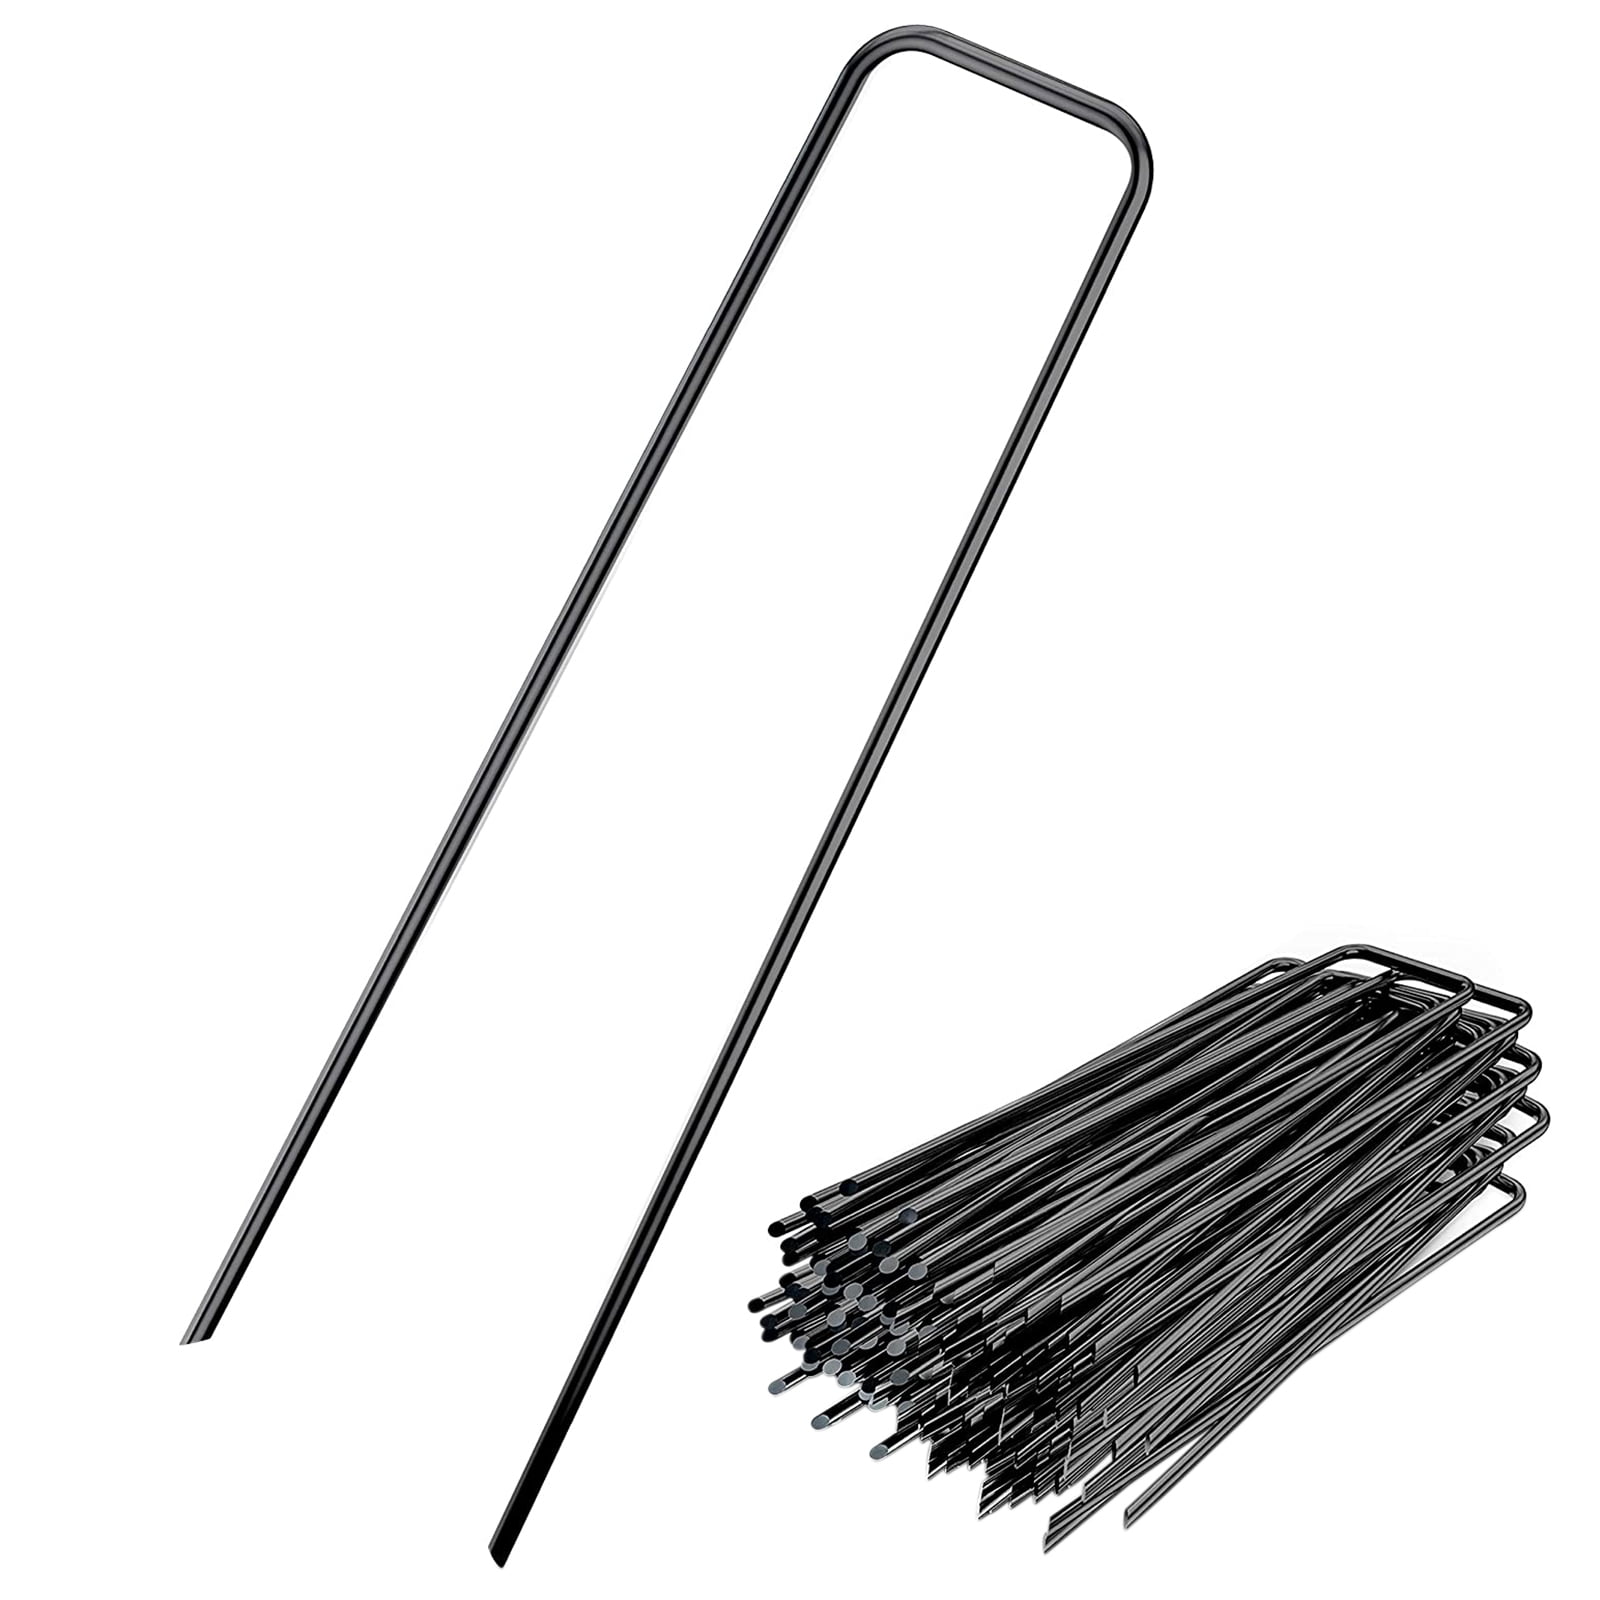 50PCS 12" U Shaped Garden Staples Securing Stable Fabric Pins Pegs Sod Stakes US 